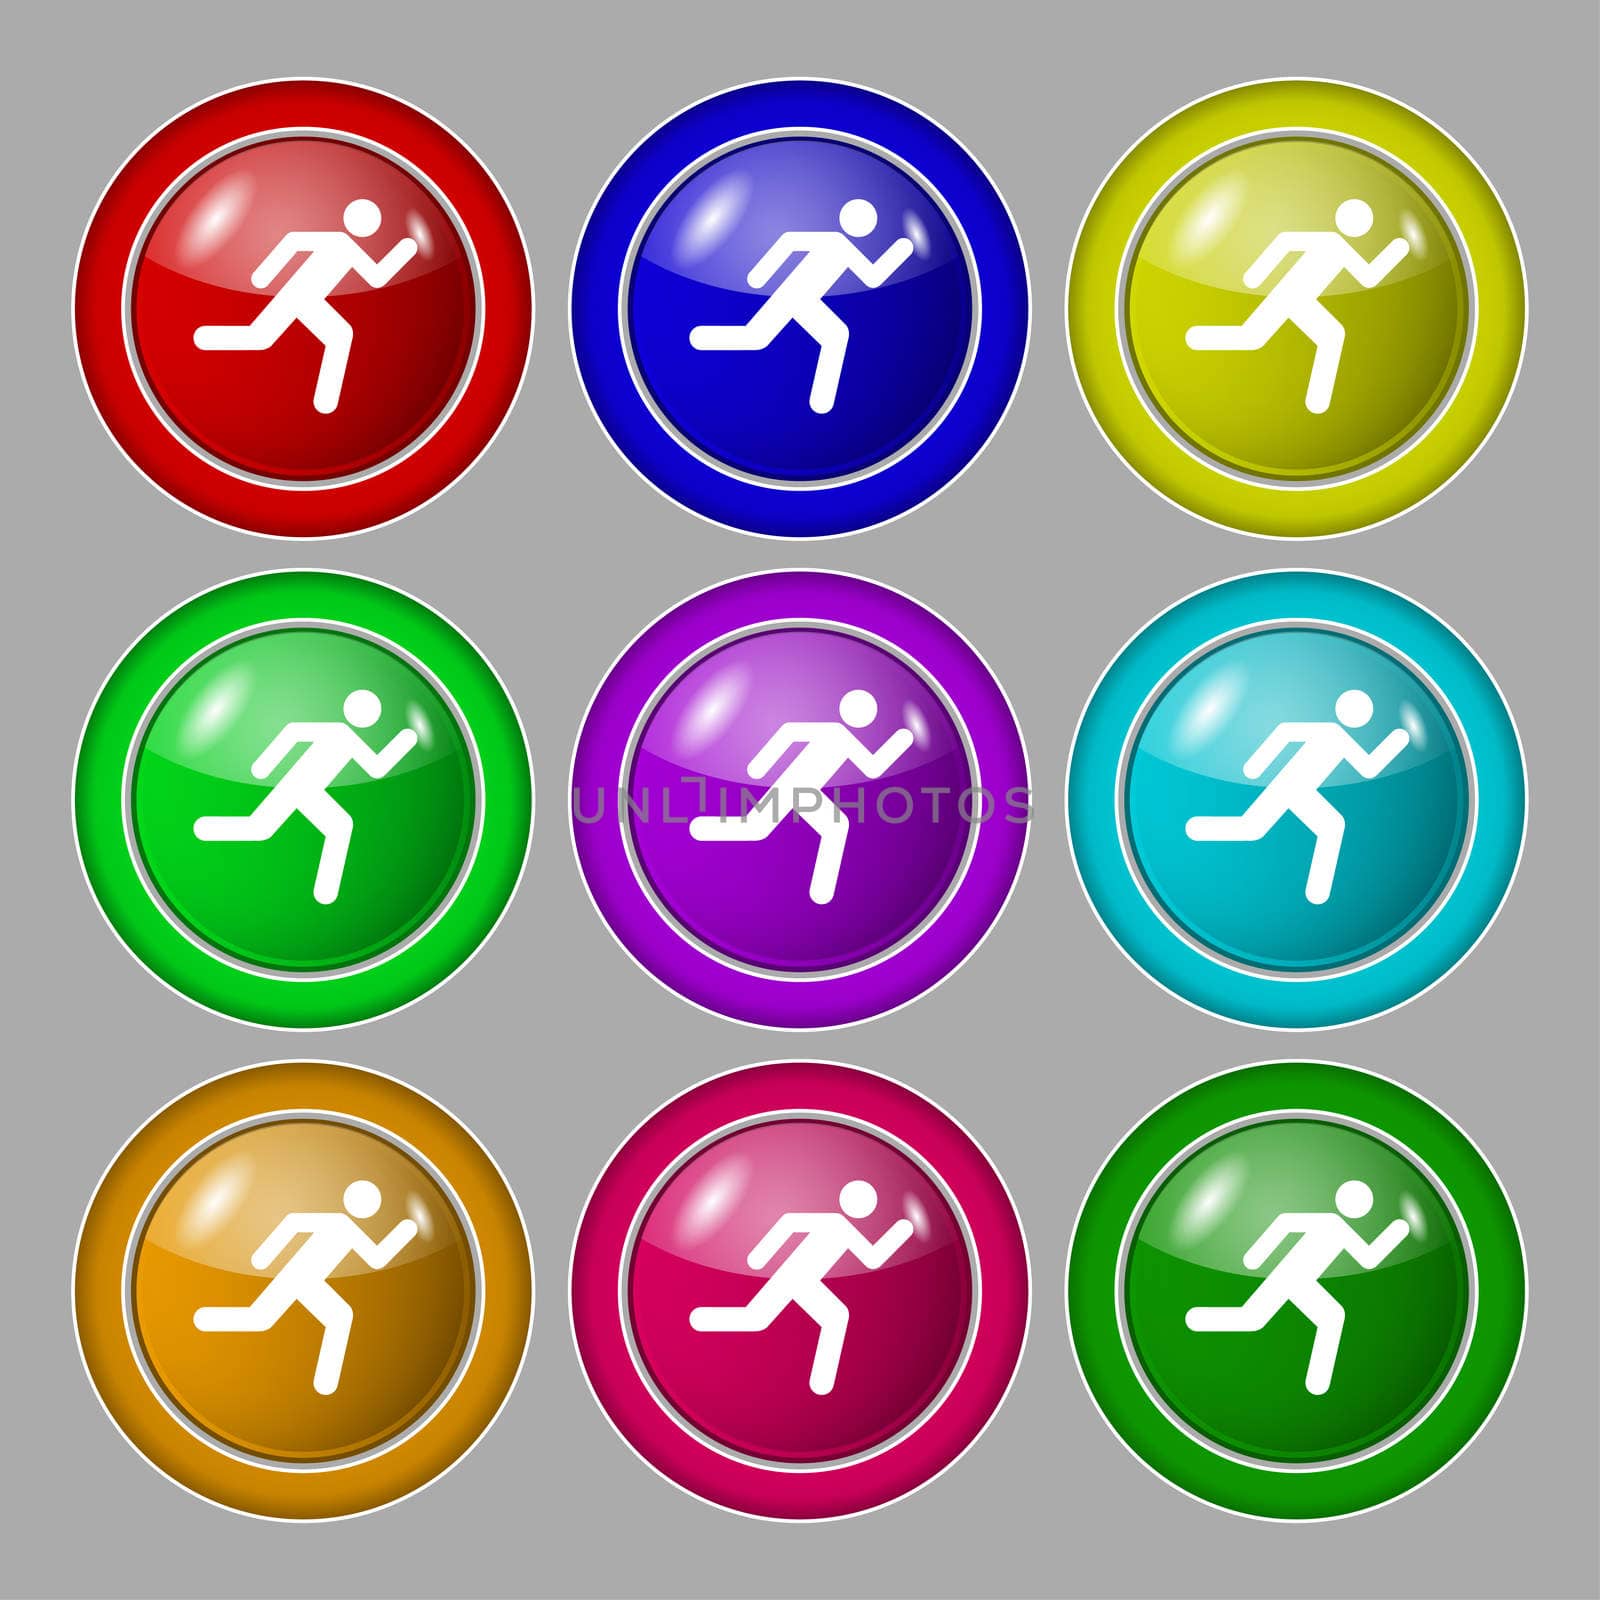 running man icon sign. symbol on nine round colourful buttons. illustration